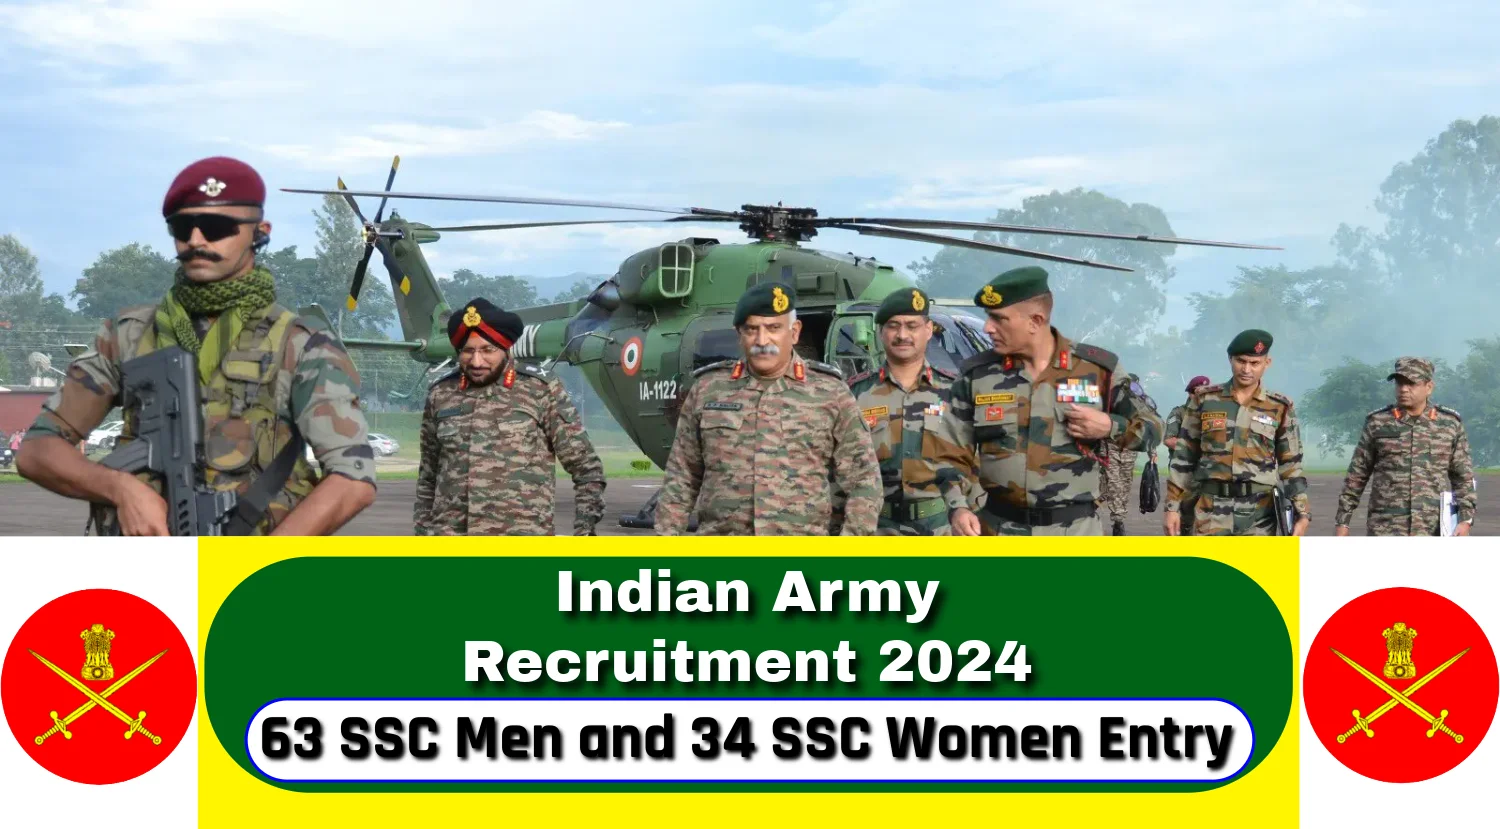 Indian Army Recruitment 2024 Notification for 3 SSC Men and 34 SSC Women Entry 2024 Out, Check Details Now